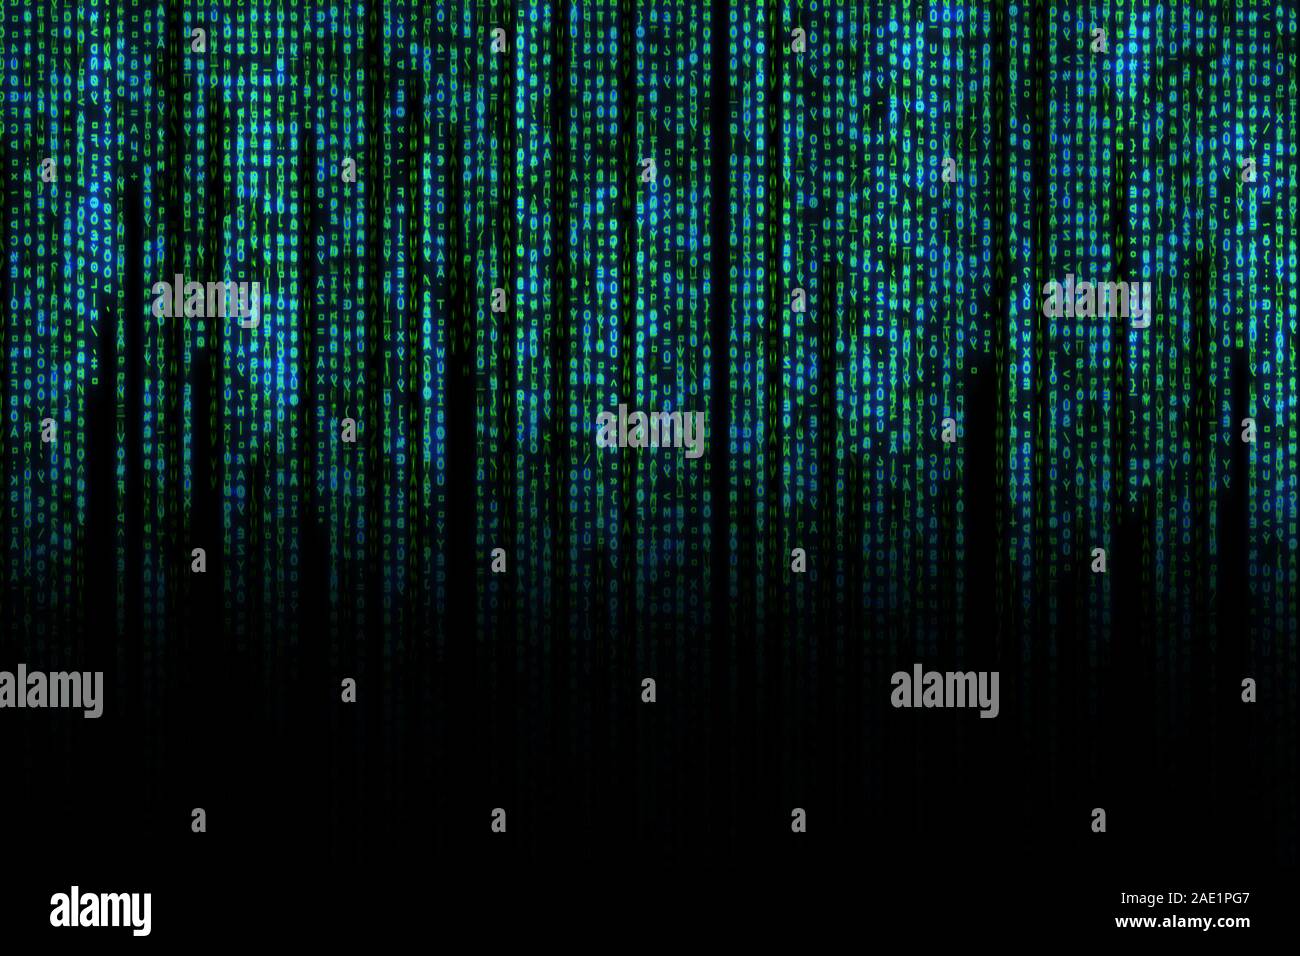 Binary matrix background. Falling sign on dark backdrop. Abstract data concept. Blue and green futuristic cyberspace Stock Photo